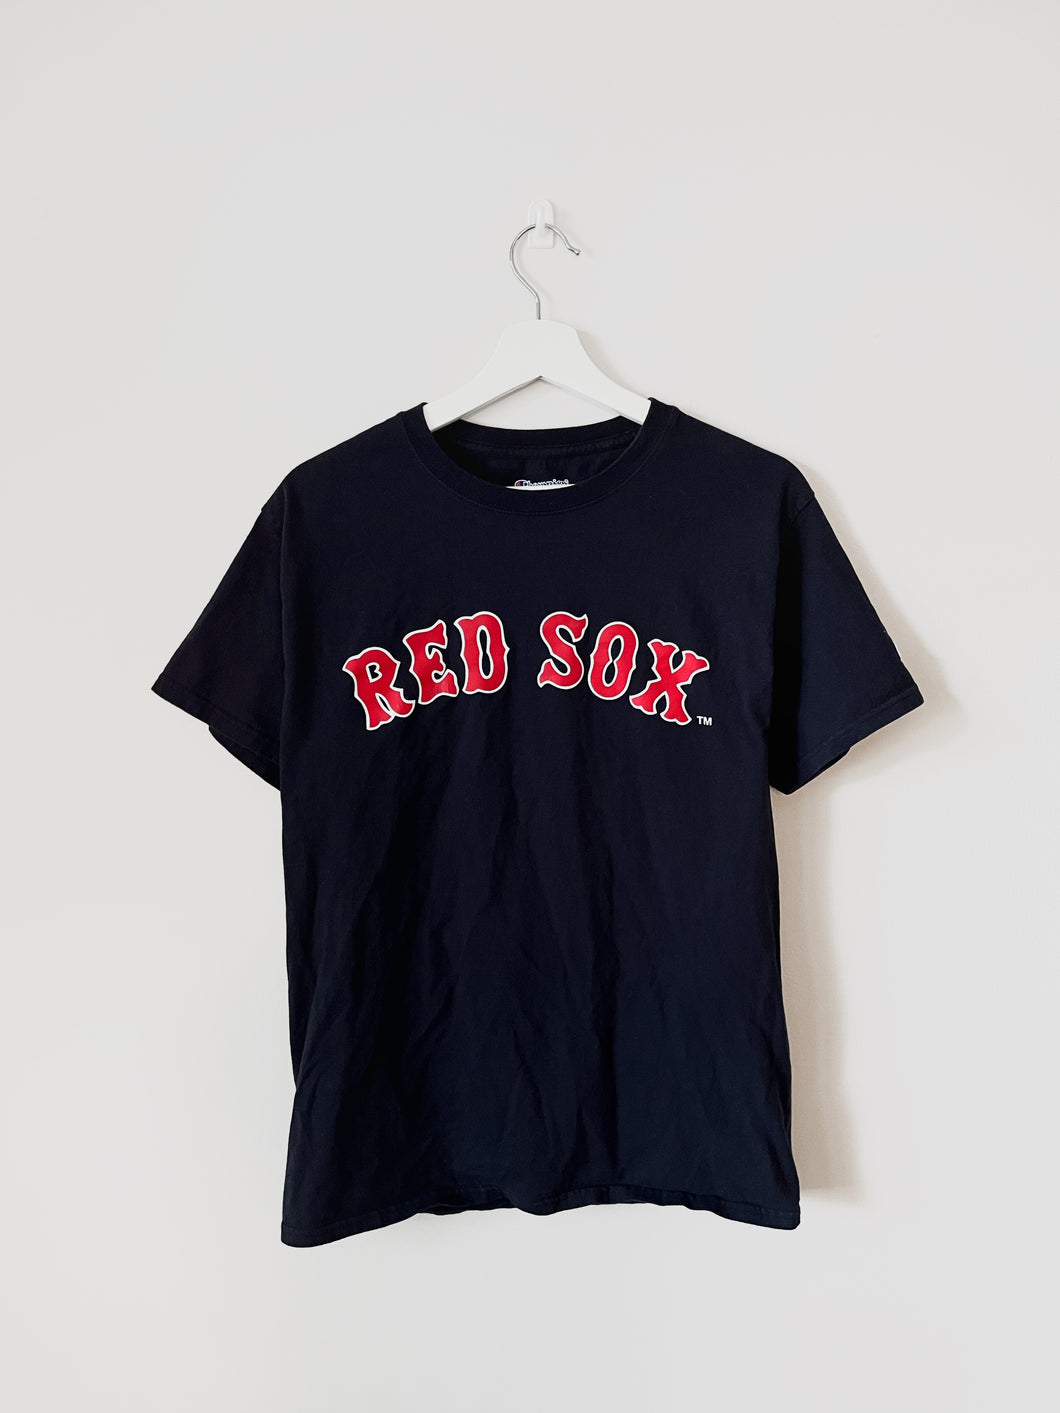 Red Sox Champion Tee